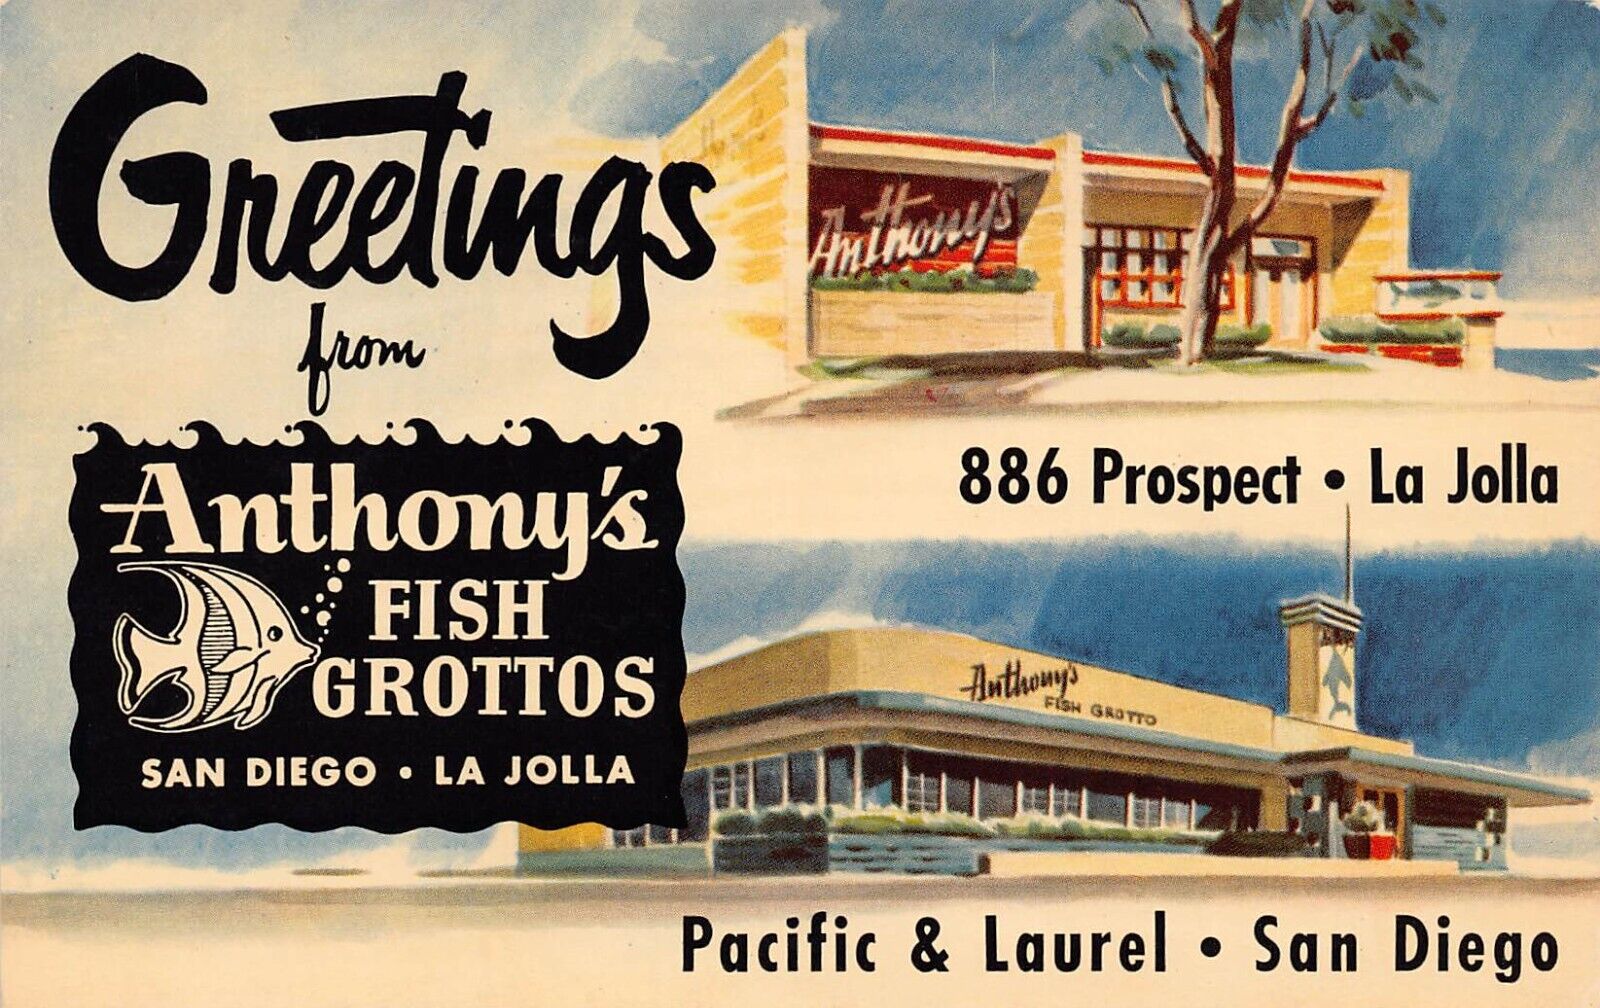 La Jolla San Diego Greetings From Anthony’s Fish Grottos Larger Not Large Letter